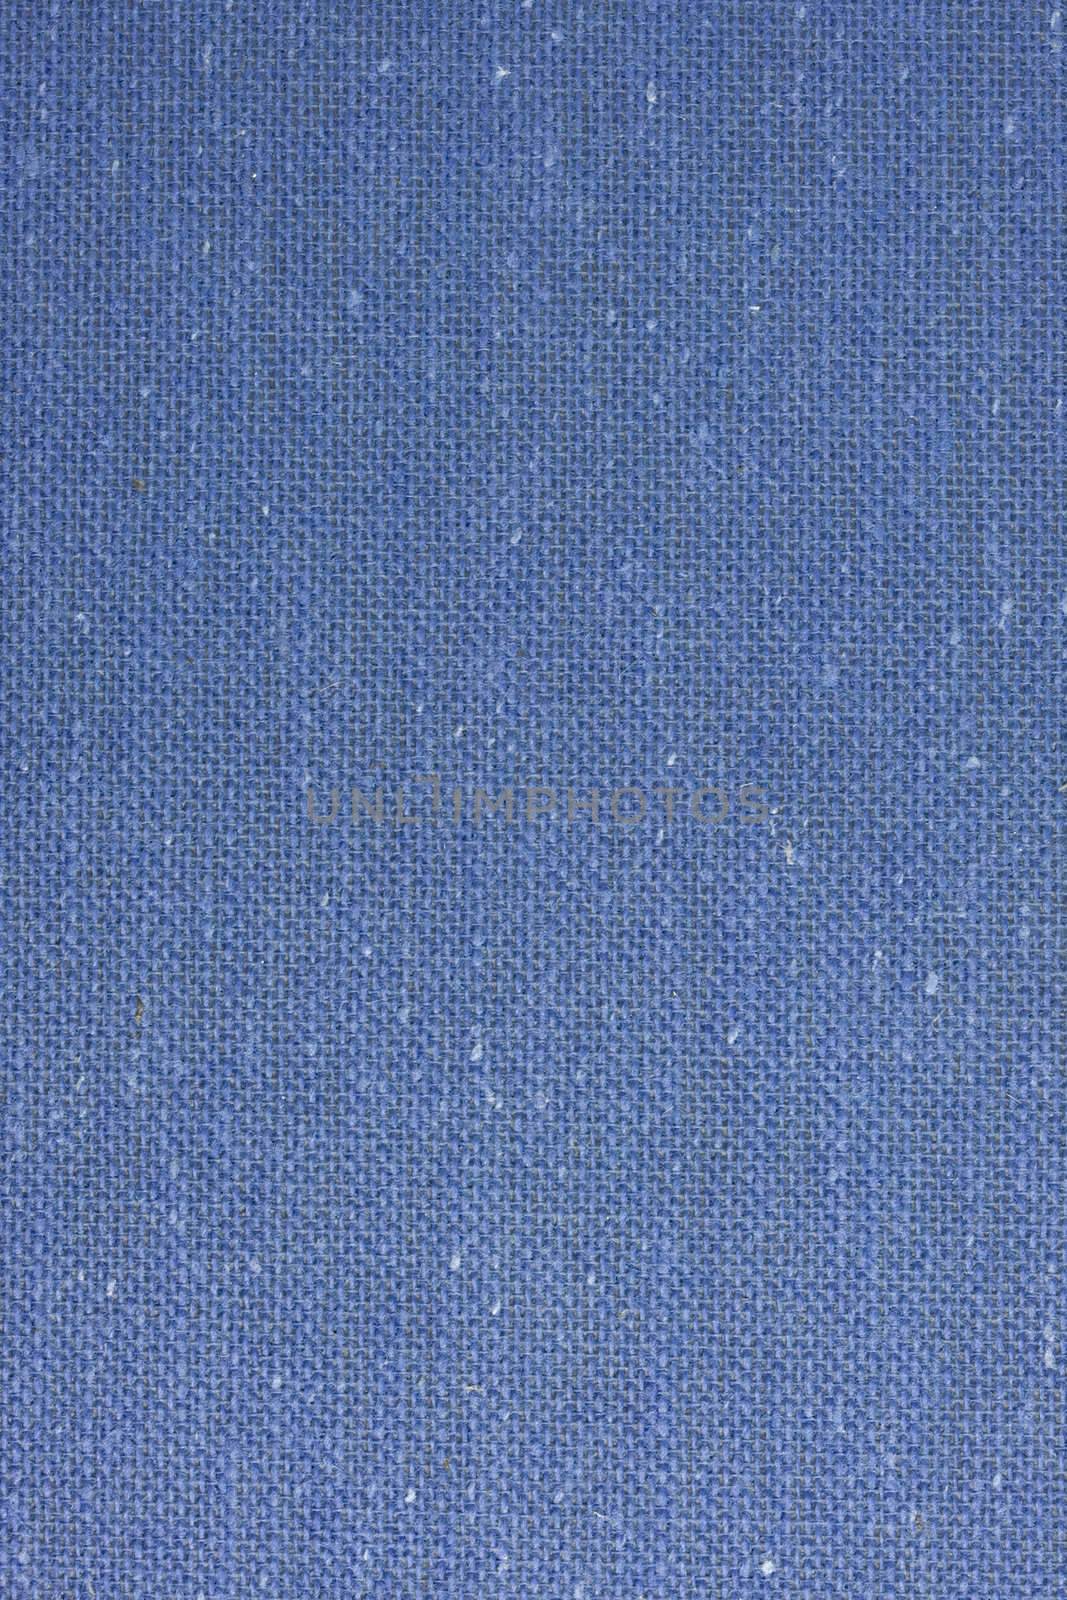 dark blue textile book cover by PixelsAway